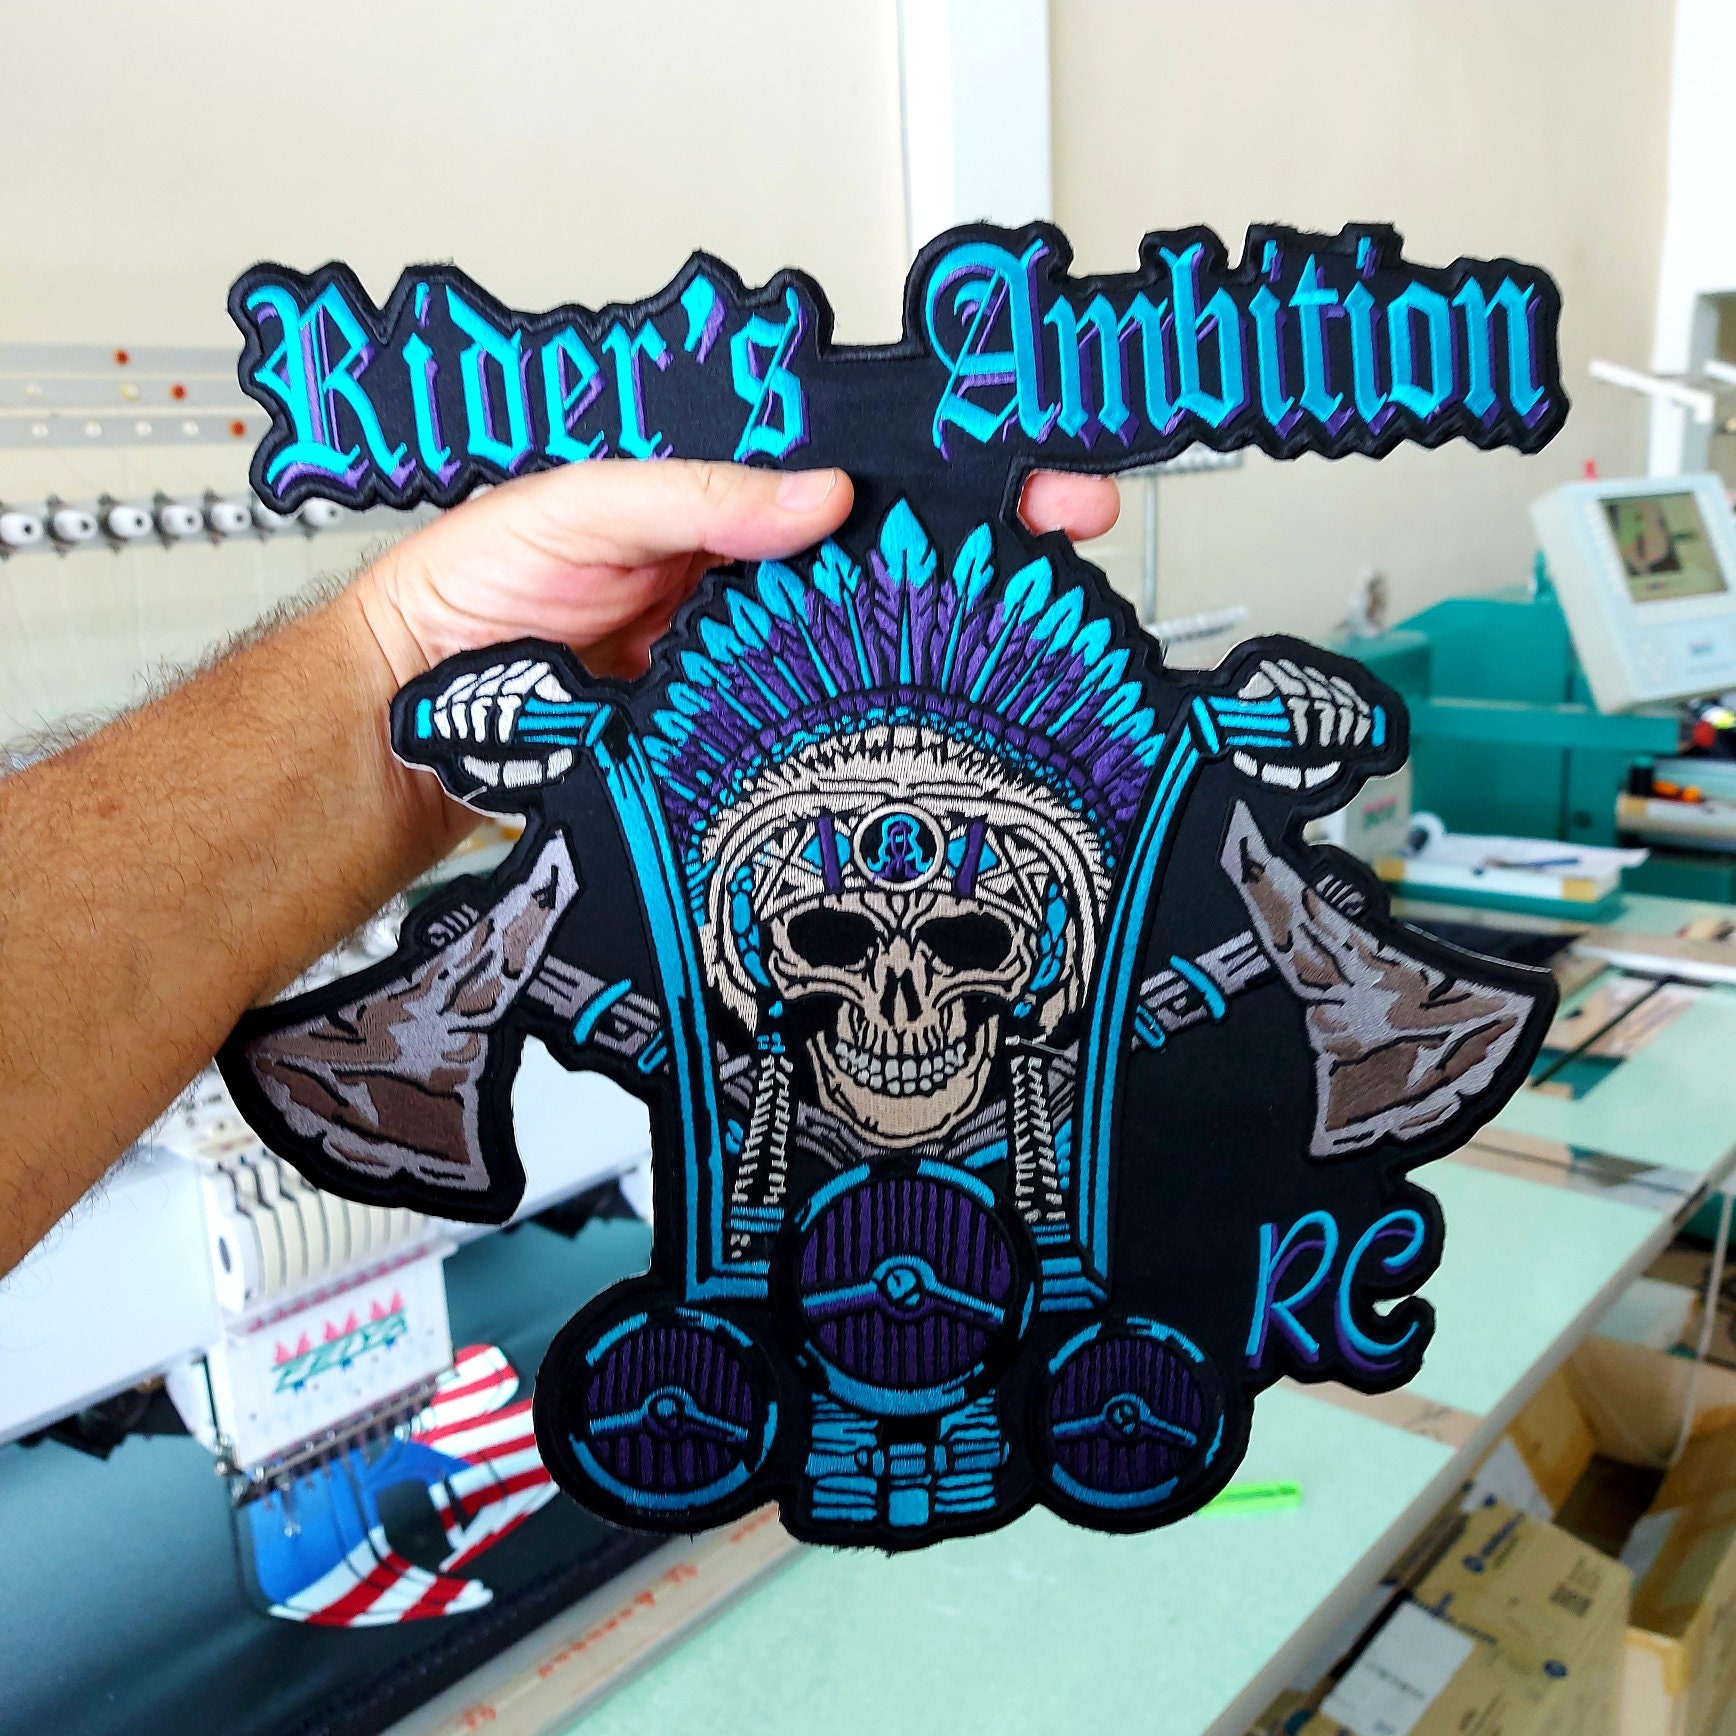 10 Custom Embroidered Patches for $49.99 –